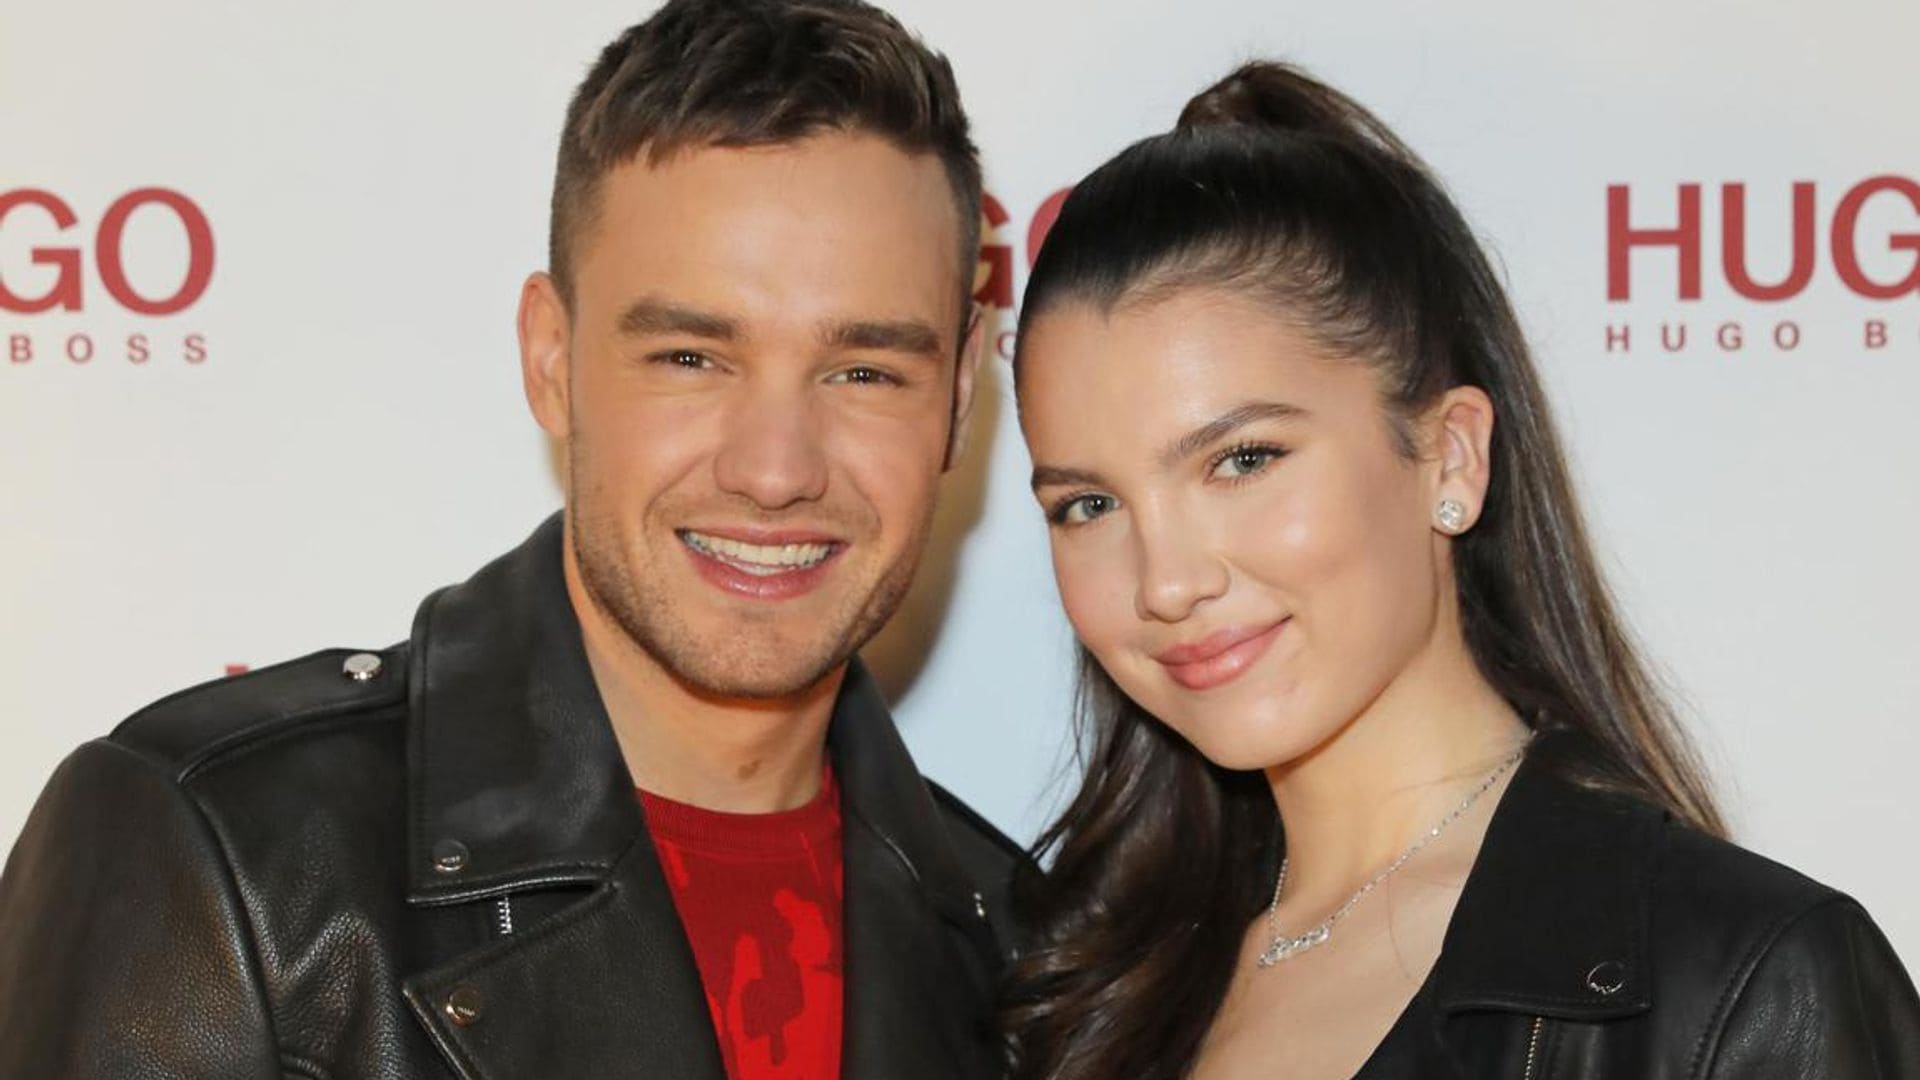 Liam Payne is engaged to Maya Henry after two years together